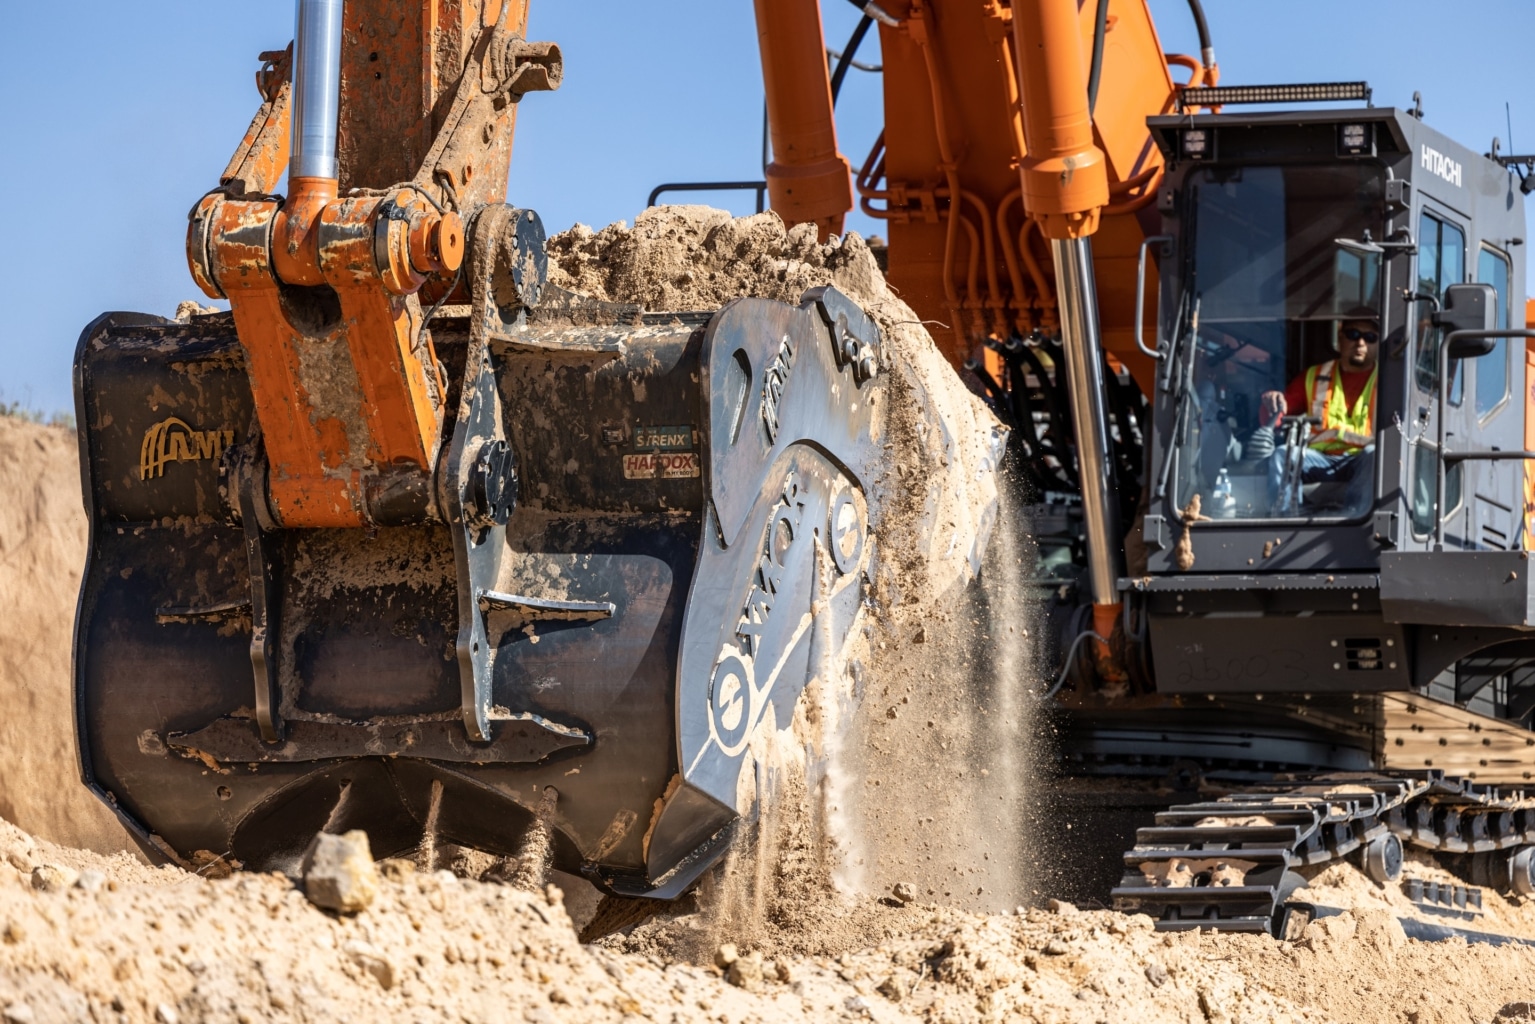 An excavator moving dirt